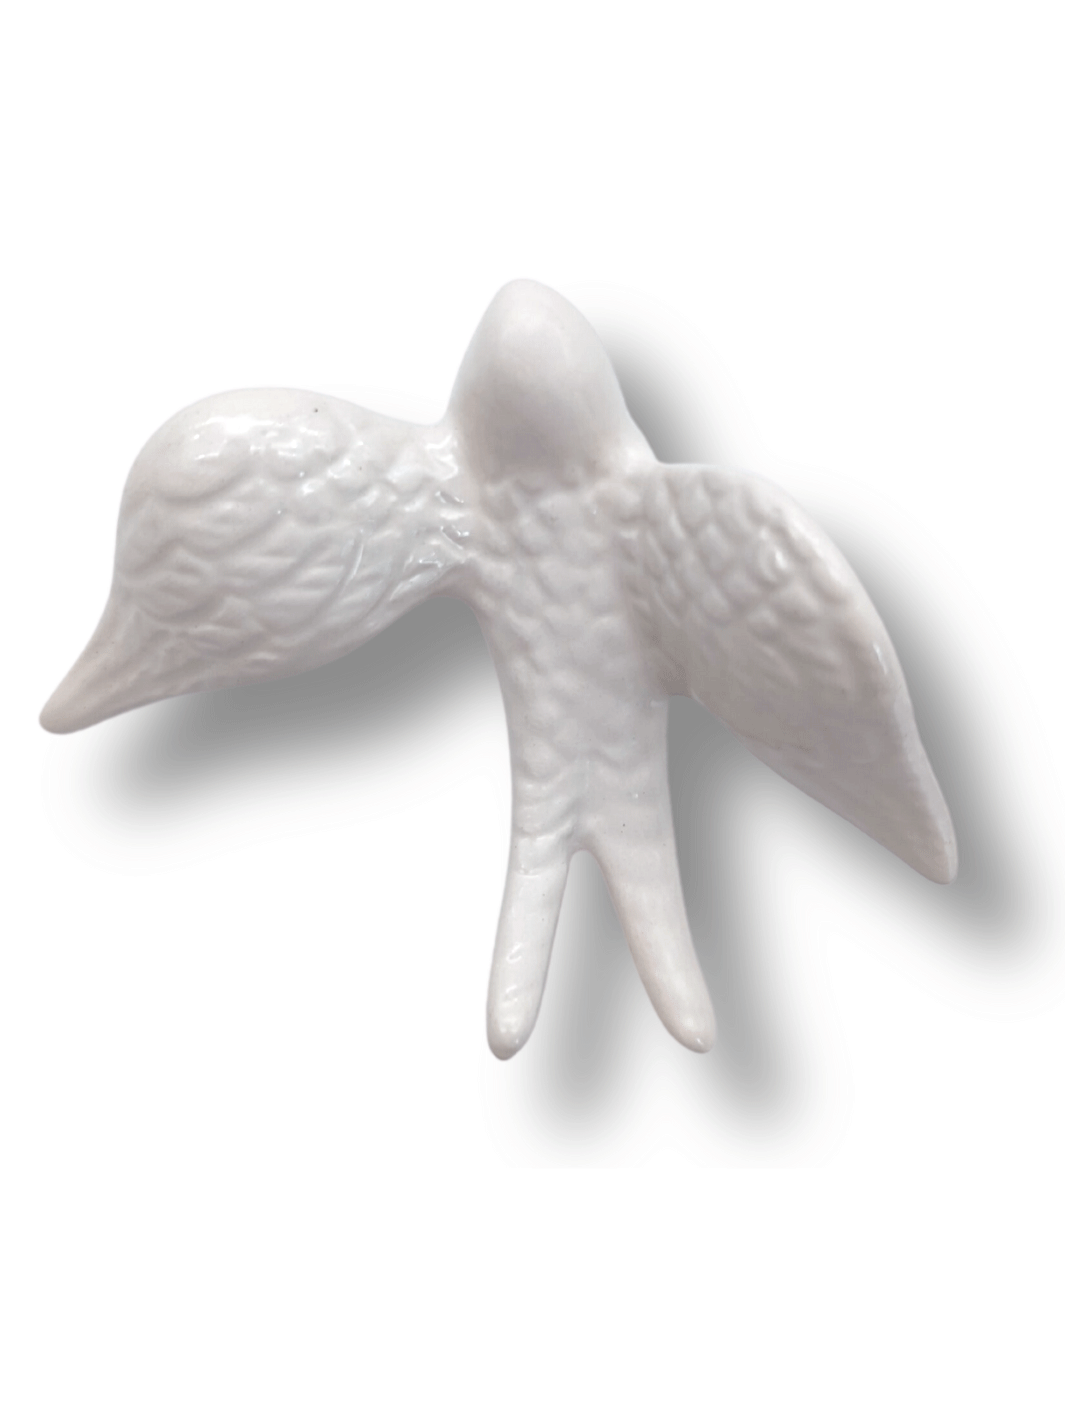 Hand Painted Small Ceramic Swallows for Home Décor - Various Colors